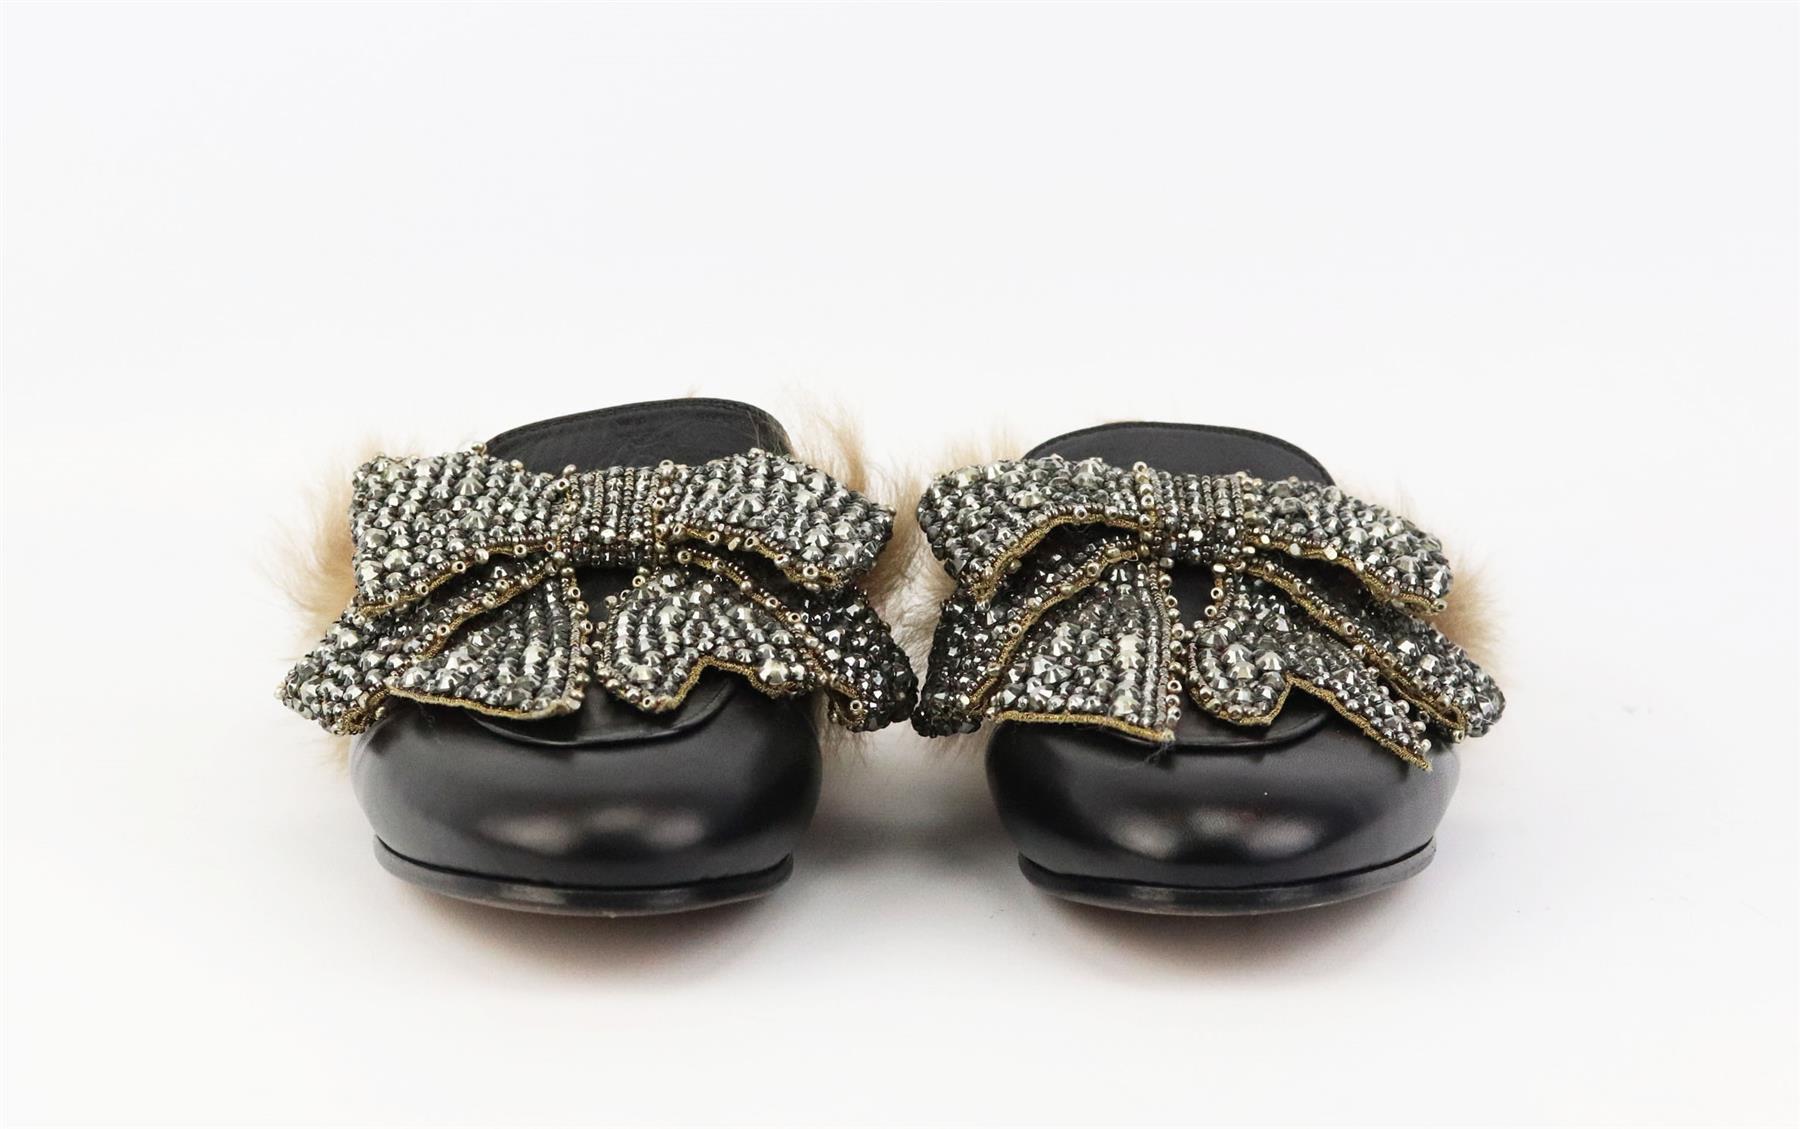 These ‘Princetown’ slippers by Gucci have been made in Italy from smooth black leather, lined in shearling-fur and topped with a crystal-embellished bow. Sole measures approximately 10 mm/ 0.5 inches. Black leather, brown shearling. Slip on. Does